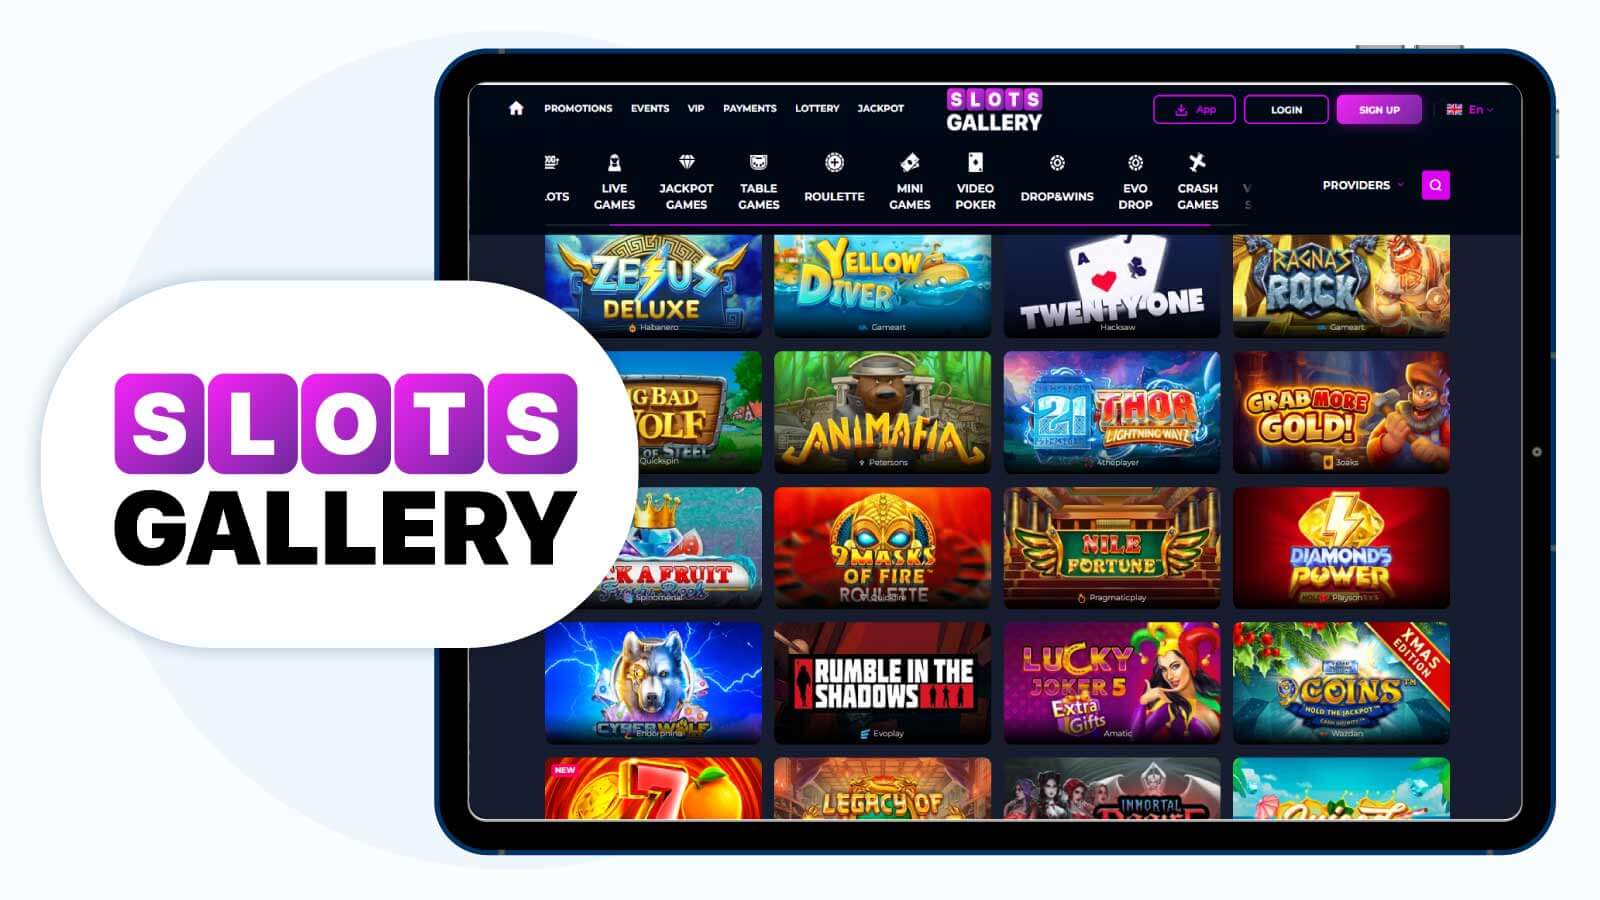 Slots-Gallery-Explore-Zeus-The-Thunderer-(95%-RTP)-with-20-No-Deposit-Spins